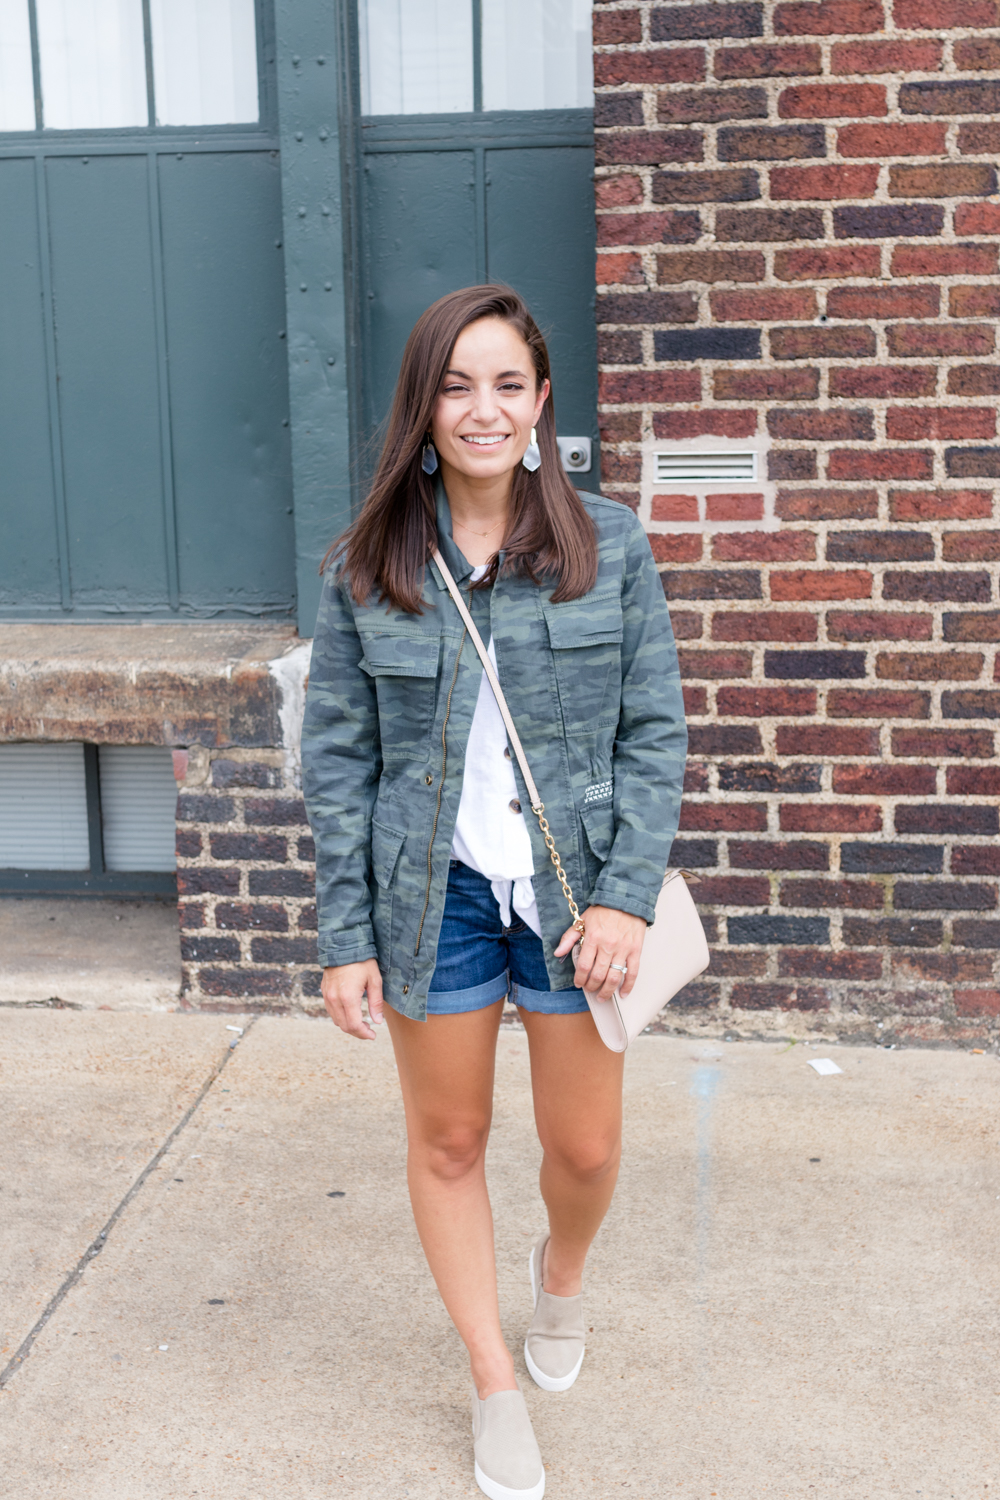 What I Bought from the Nordstrom Sale | Nordstrom Sale | Caslon Camo Jacket | Caslon Wedge Sneakers 